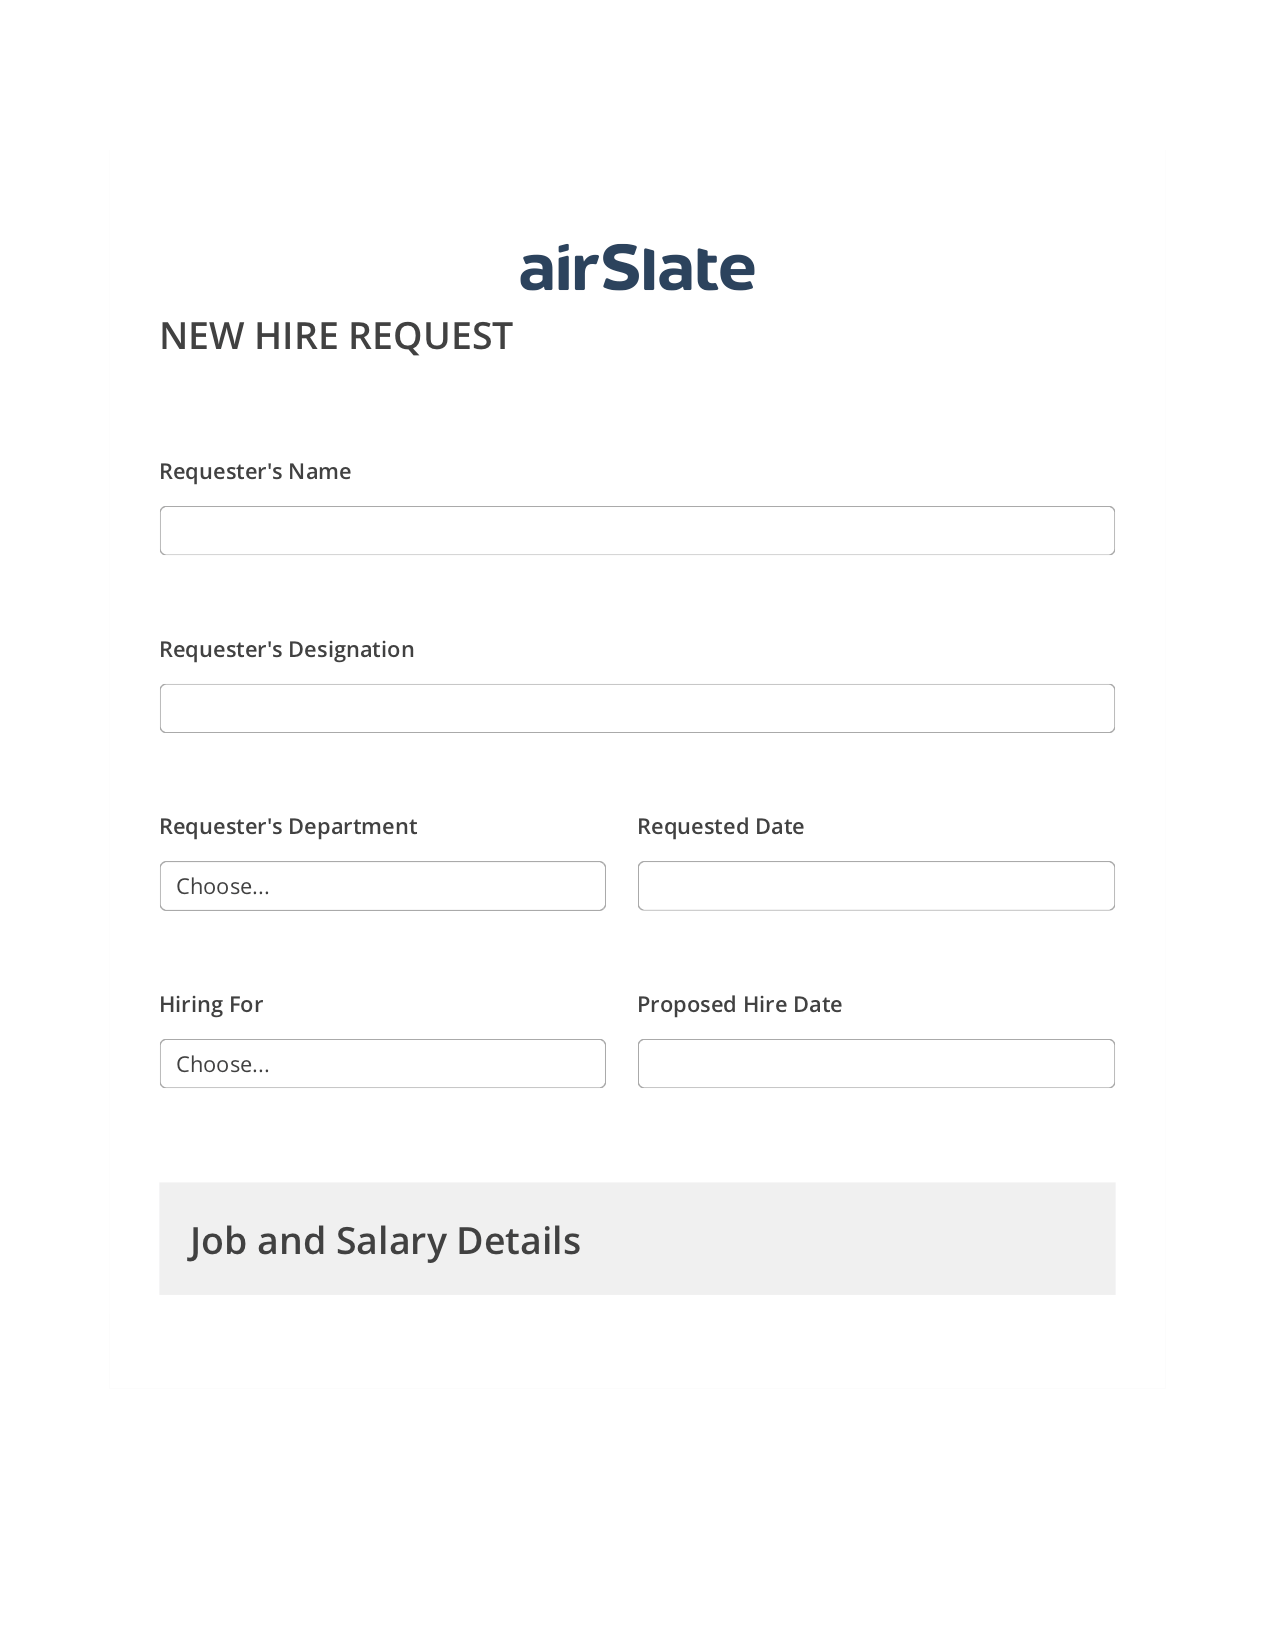 Hiring Request Workflow Pre-fill Dropdowns from Smartsheet Bot, Create NetSuite Record bot, Export to Excel 365 Bot